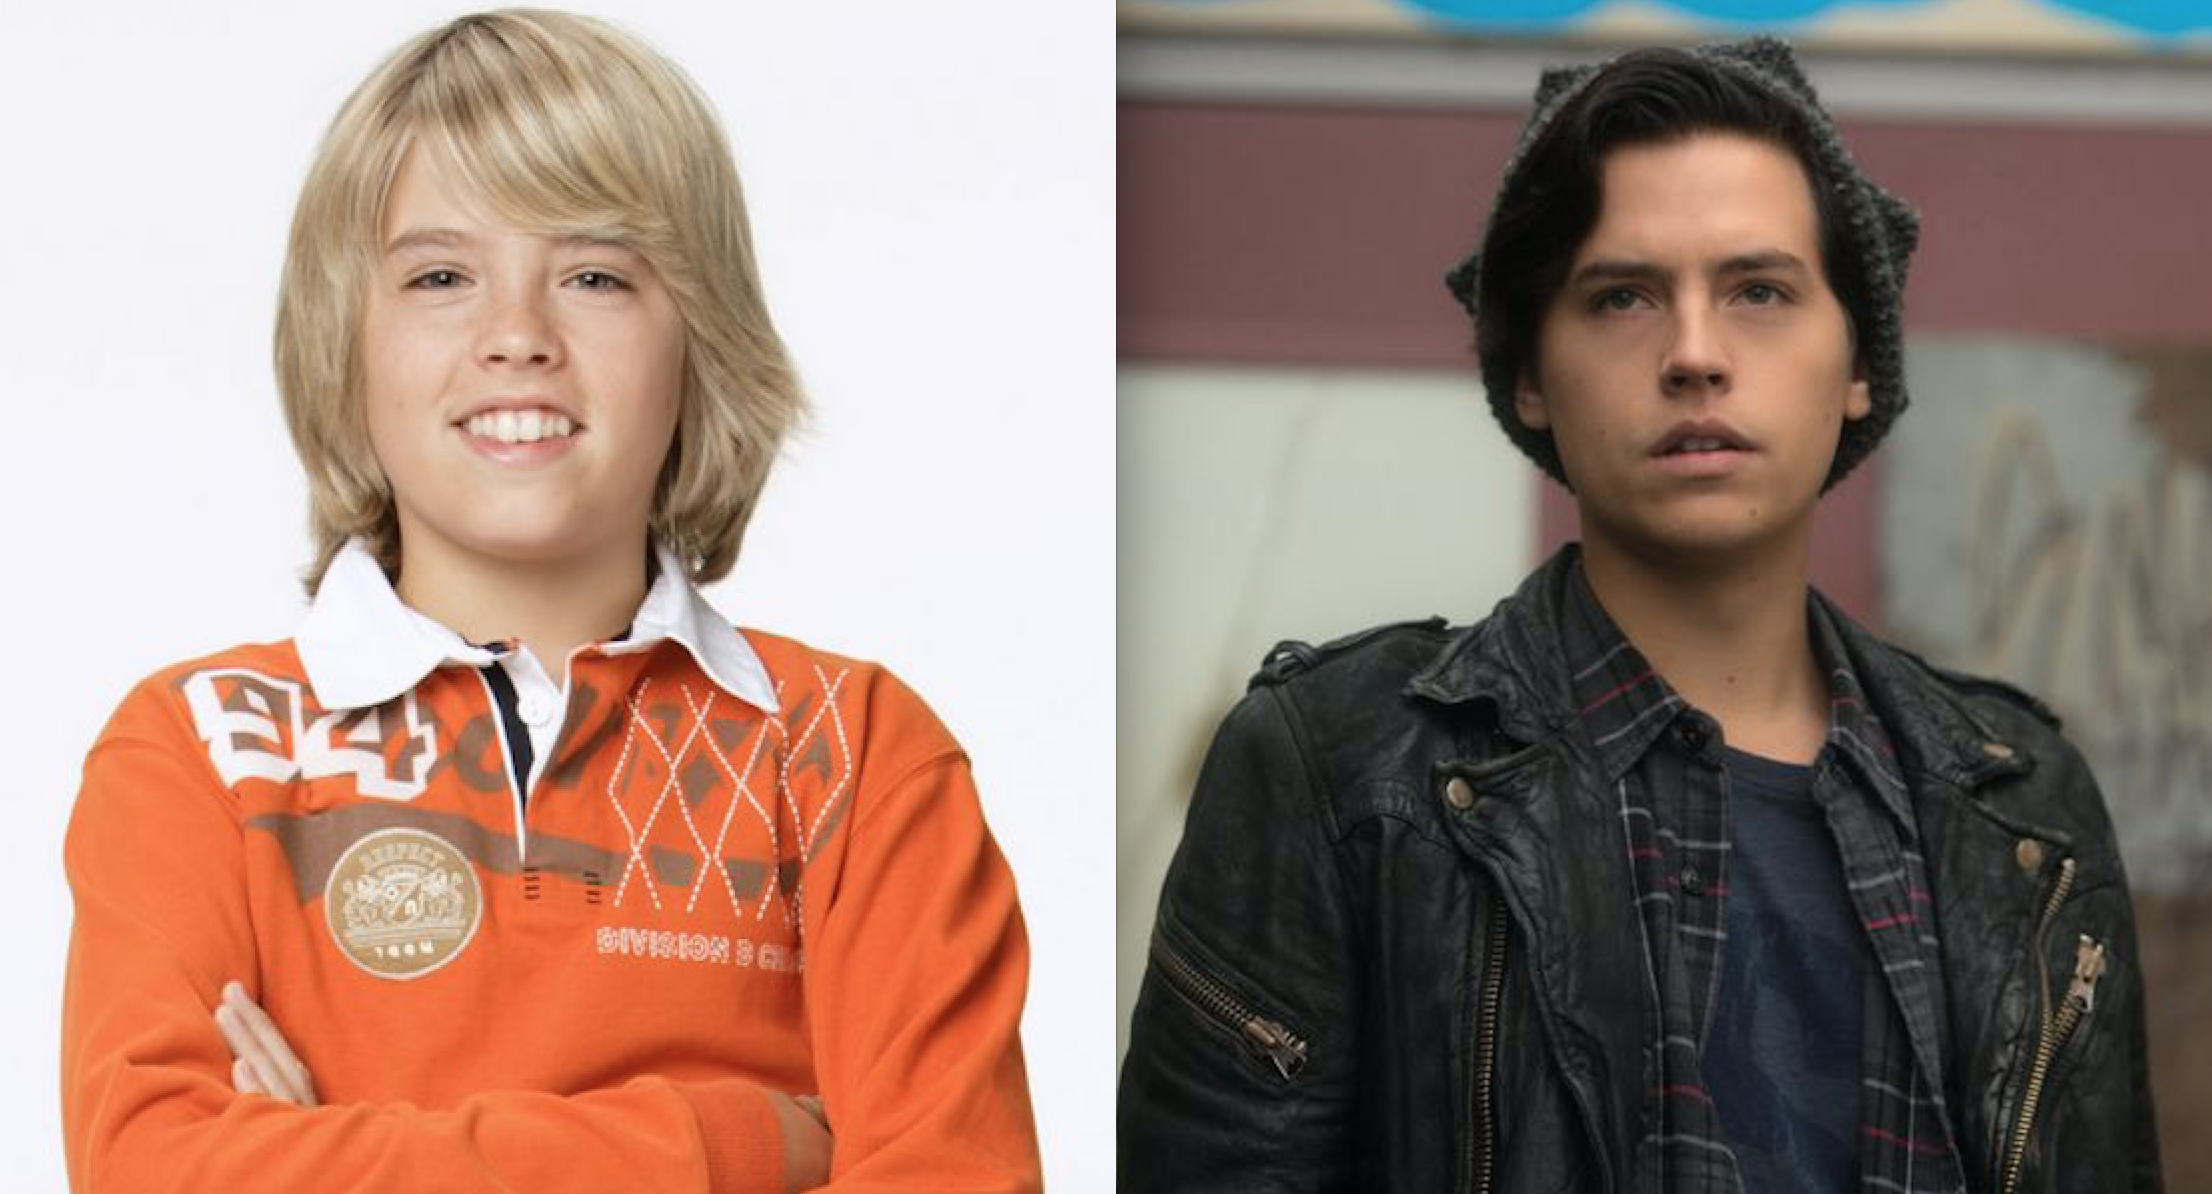 Sprouse 20 Know Cole About and and Zack Jughead From Cody Facts Zack to - from Things Riverdale